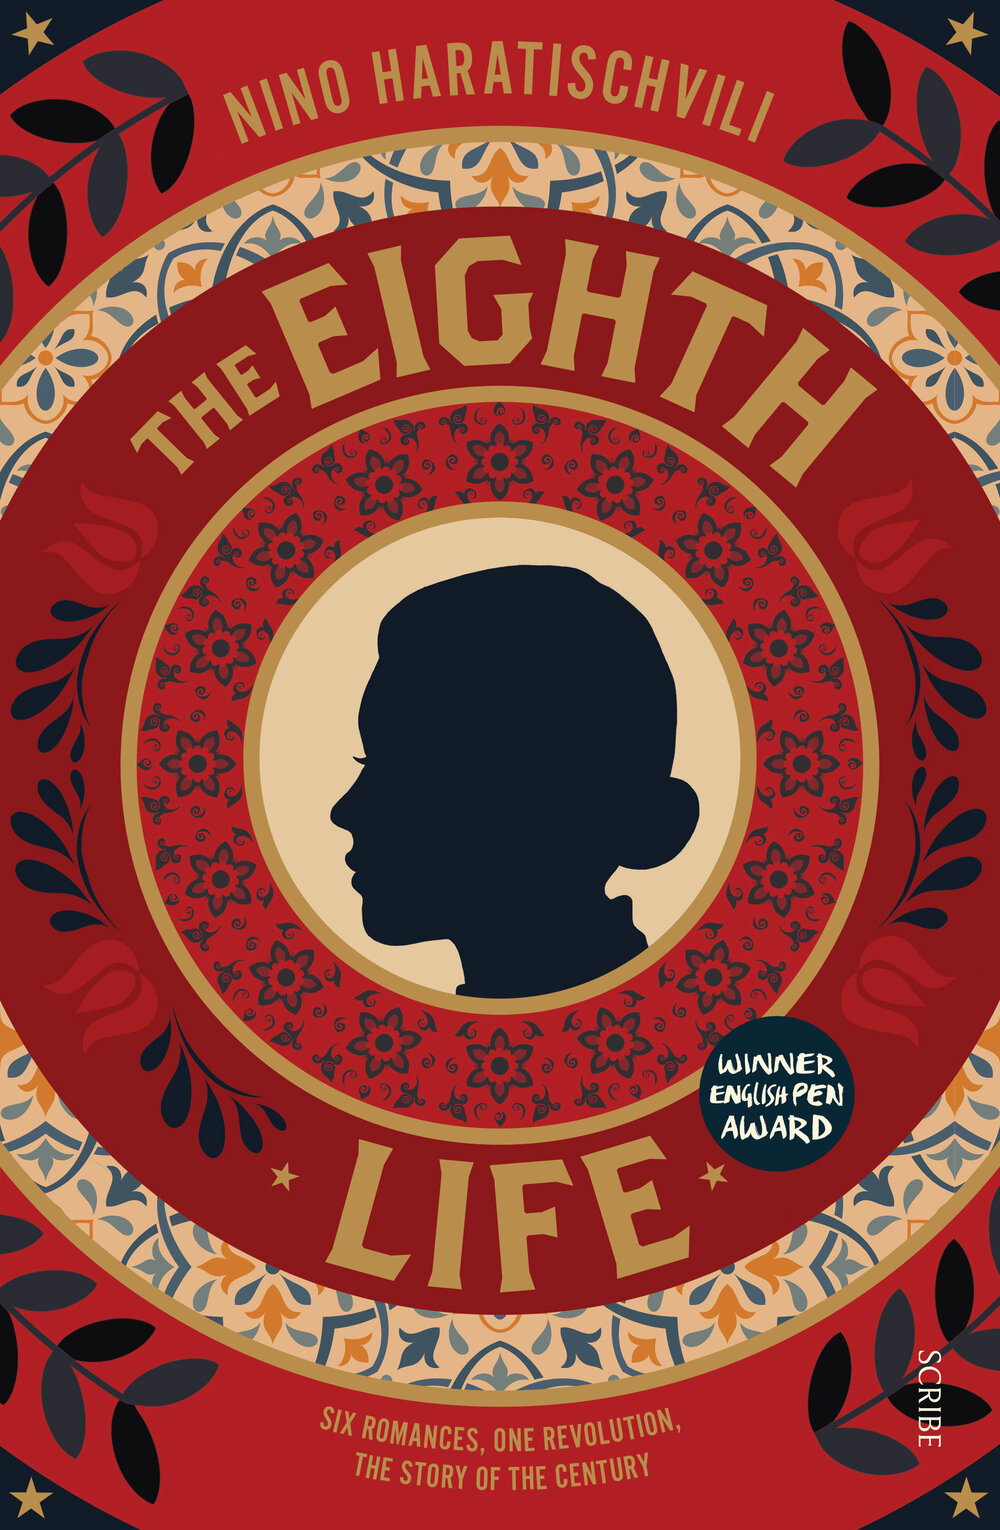 The eighth life book cover.jpg